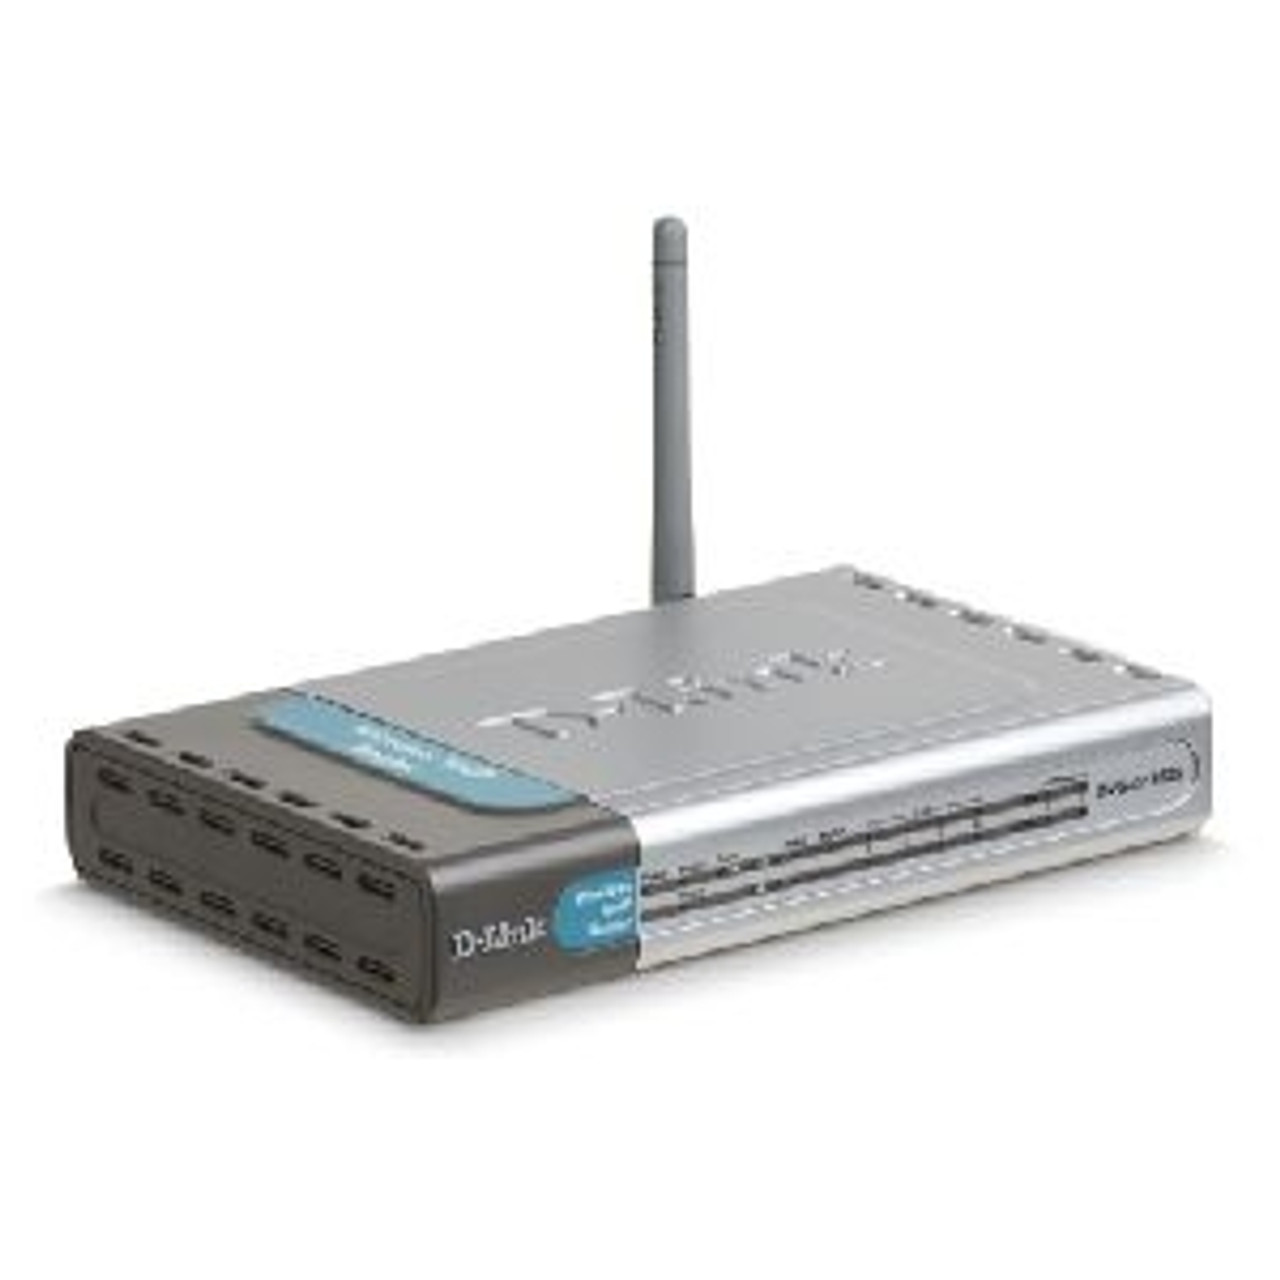 DVGG1402S D-Link DVG-G1402S Wireless Broadband VoIP Router (Refurbished)